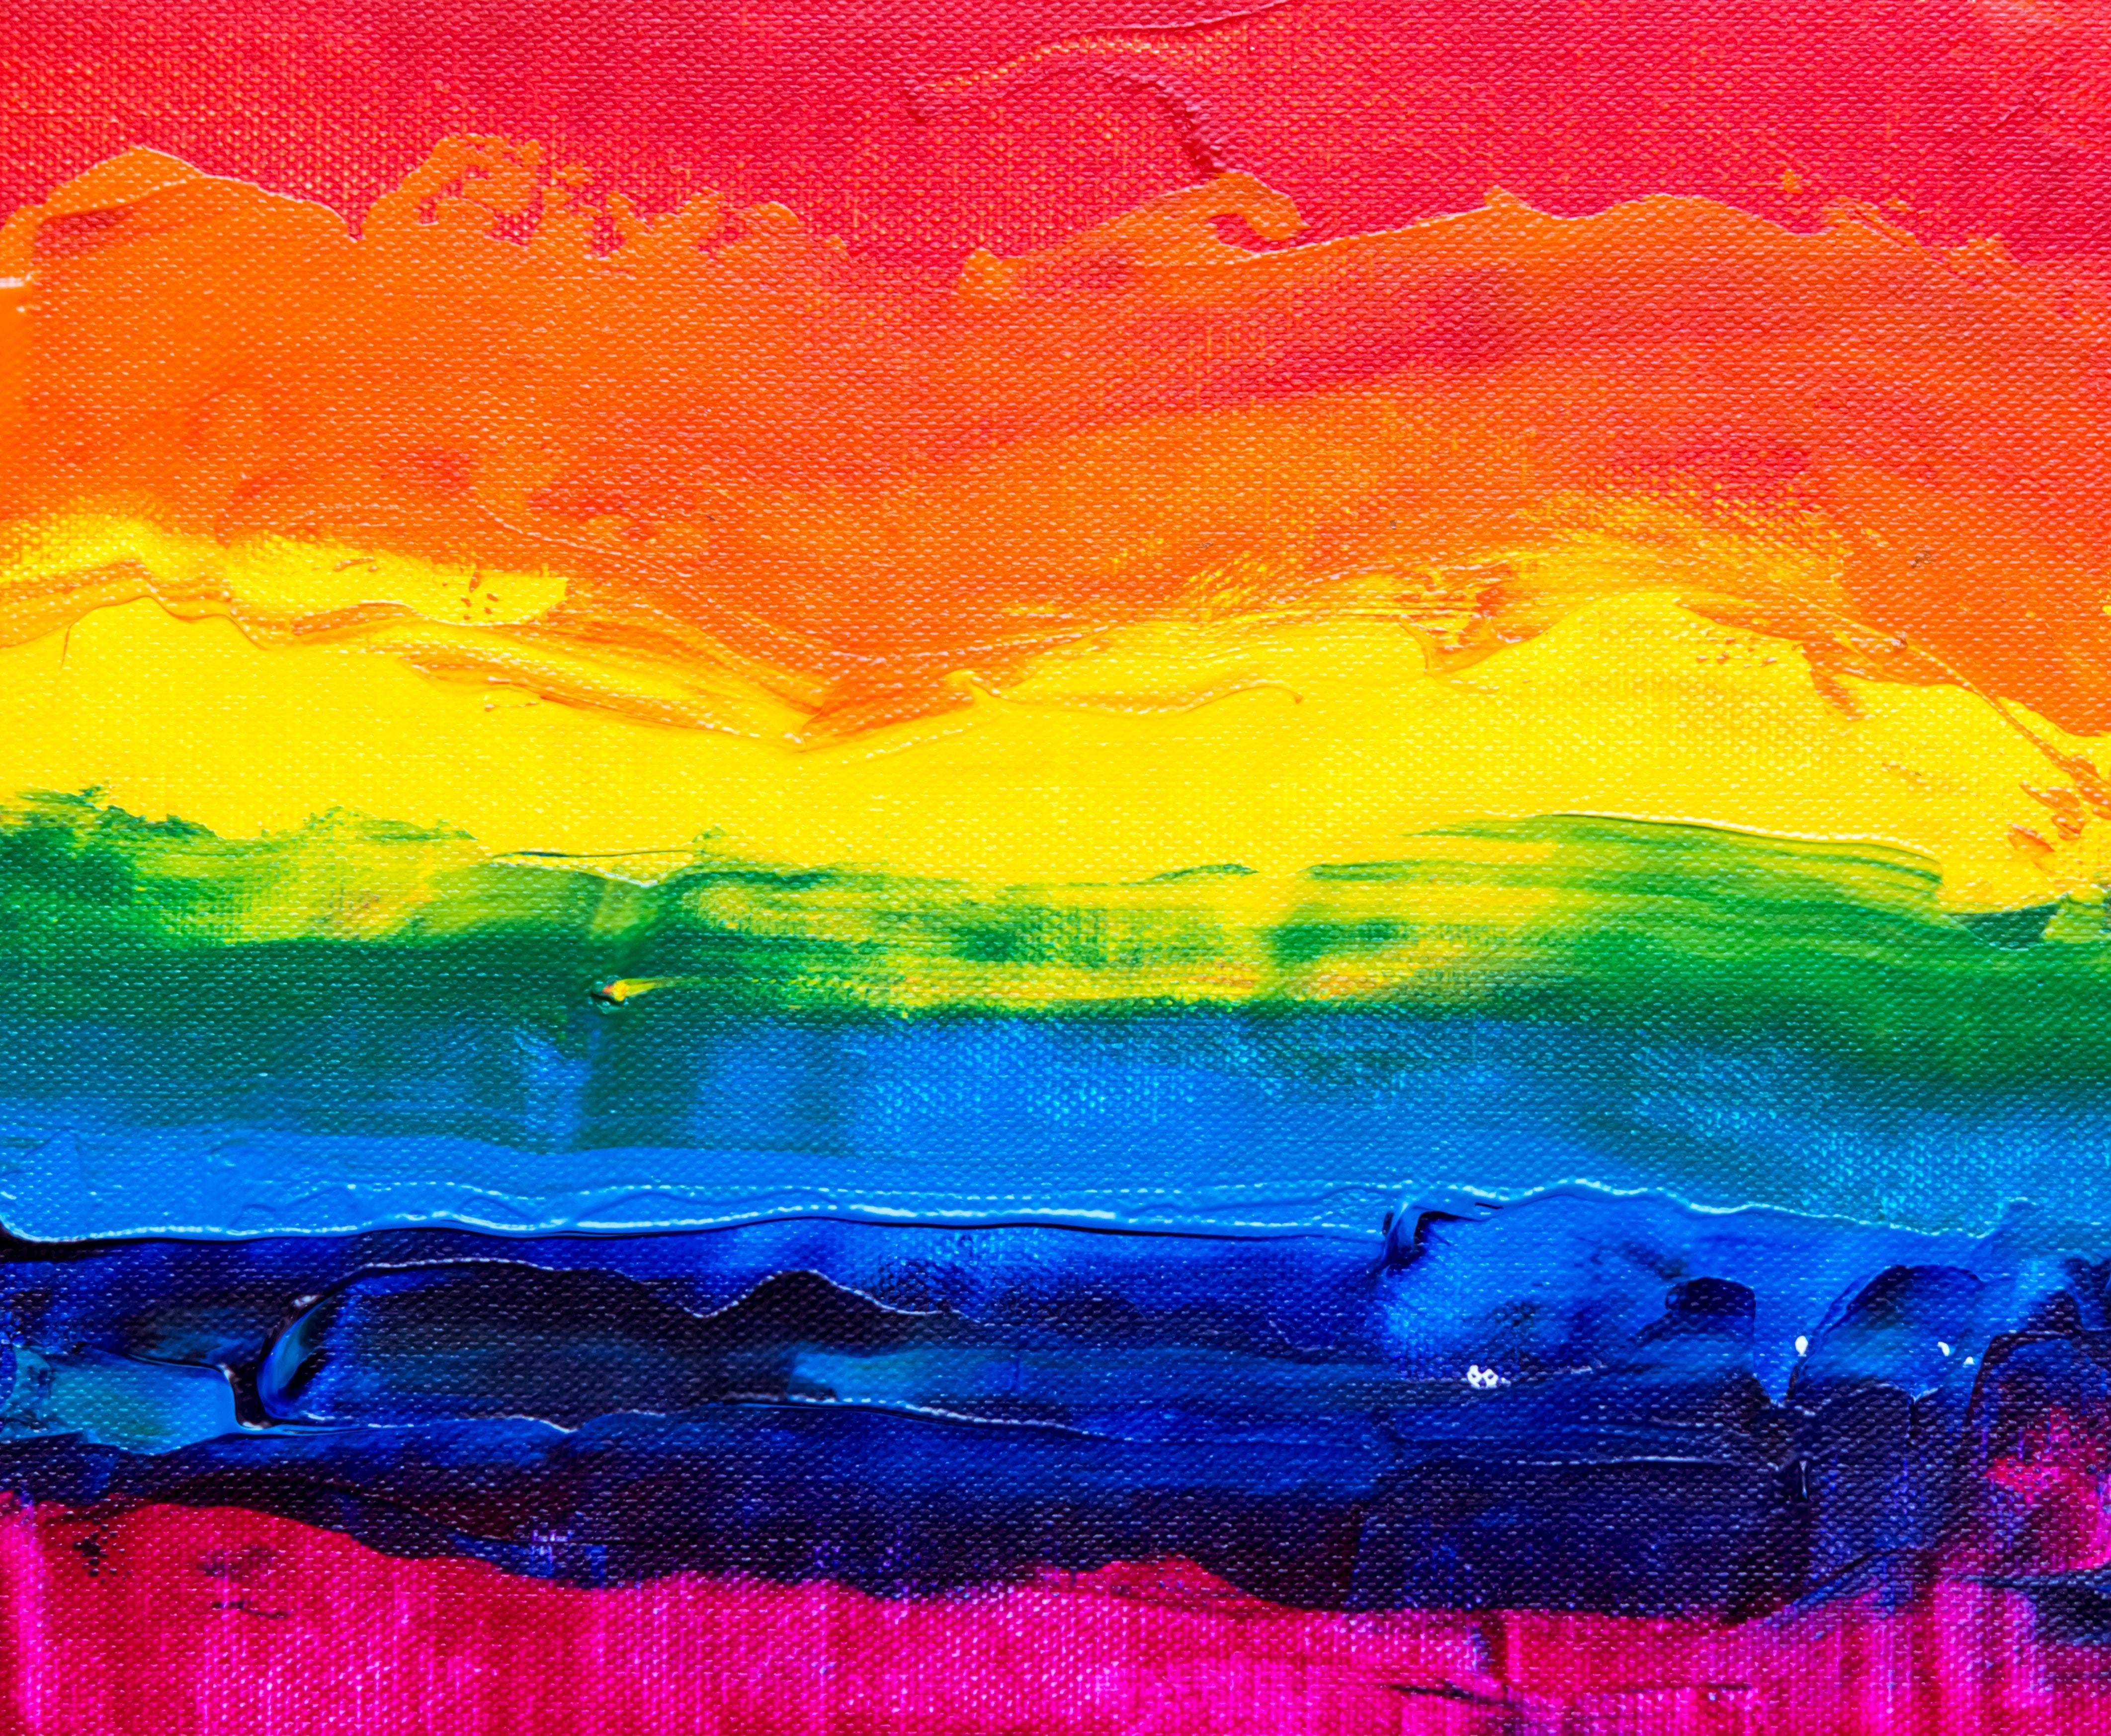 A closeup of a painting with horizontal, free-form stripes the colors of a rainbow.